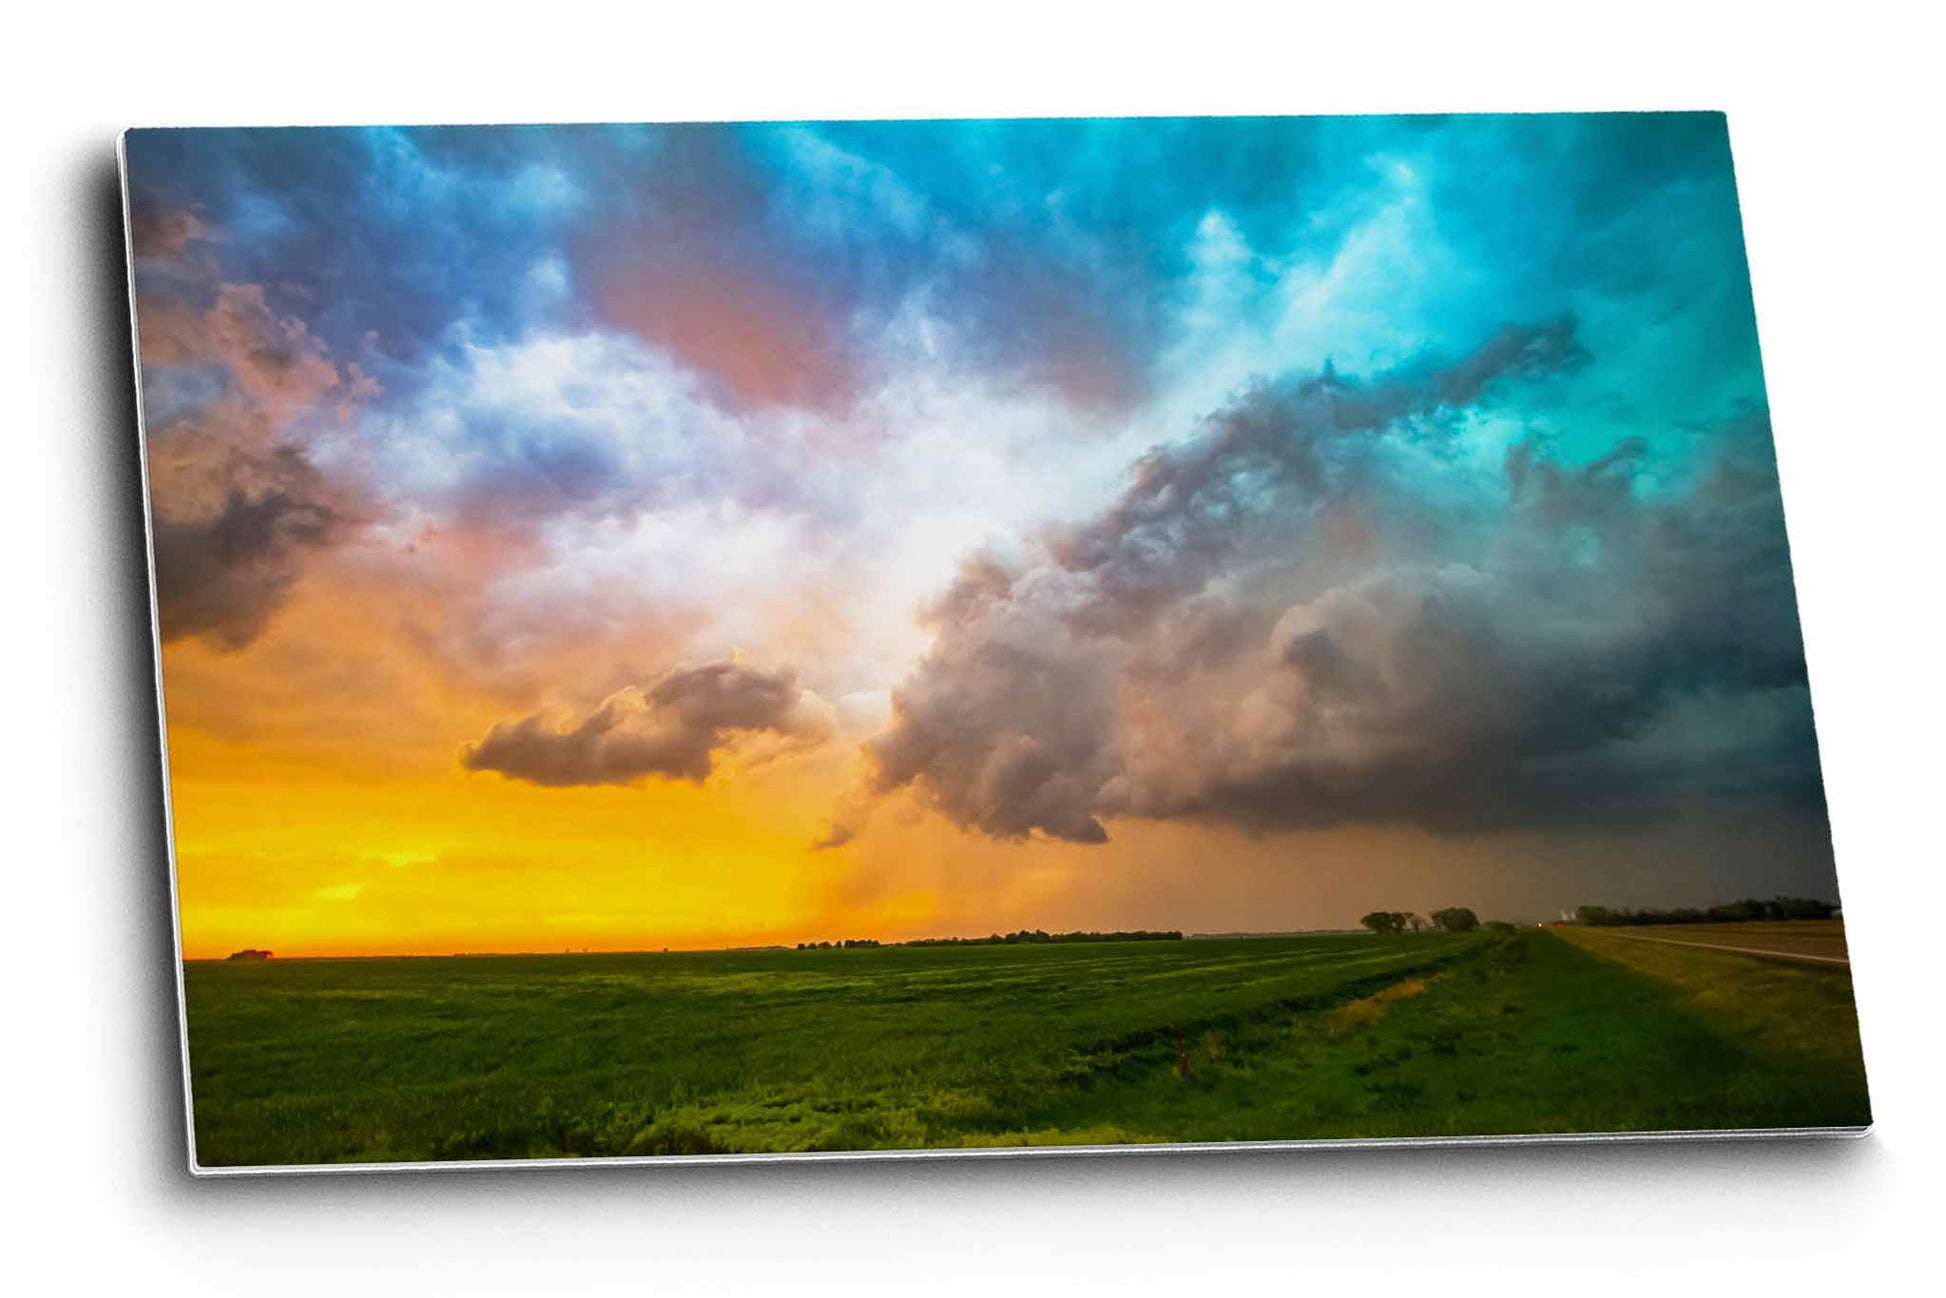 Thunderstorm metal print of colorful storm clouds over a field at sunset on a stormy spring evening in Kansas by Sean Ramsey of Southern Plains Photography.